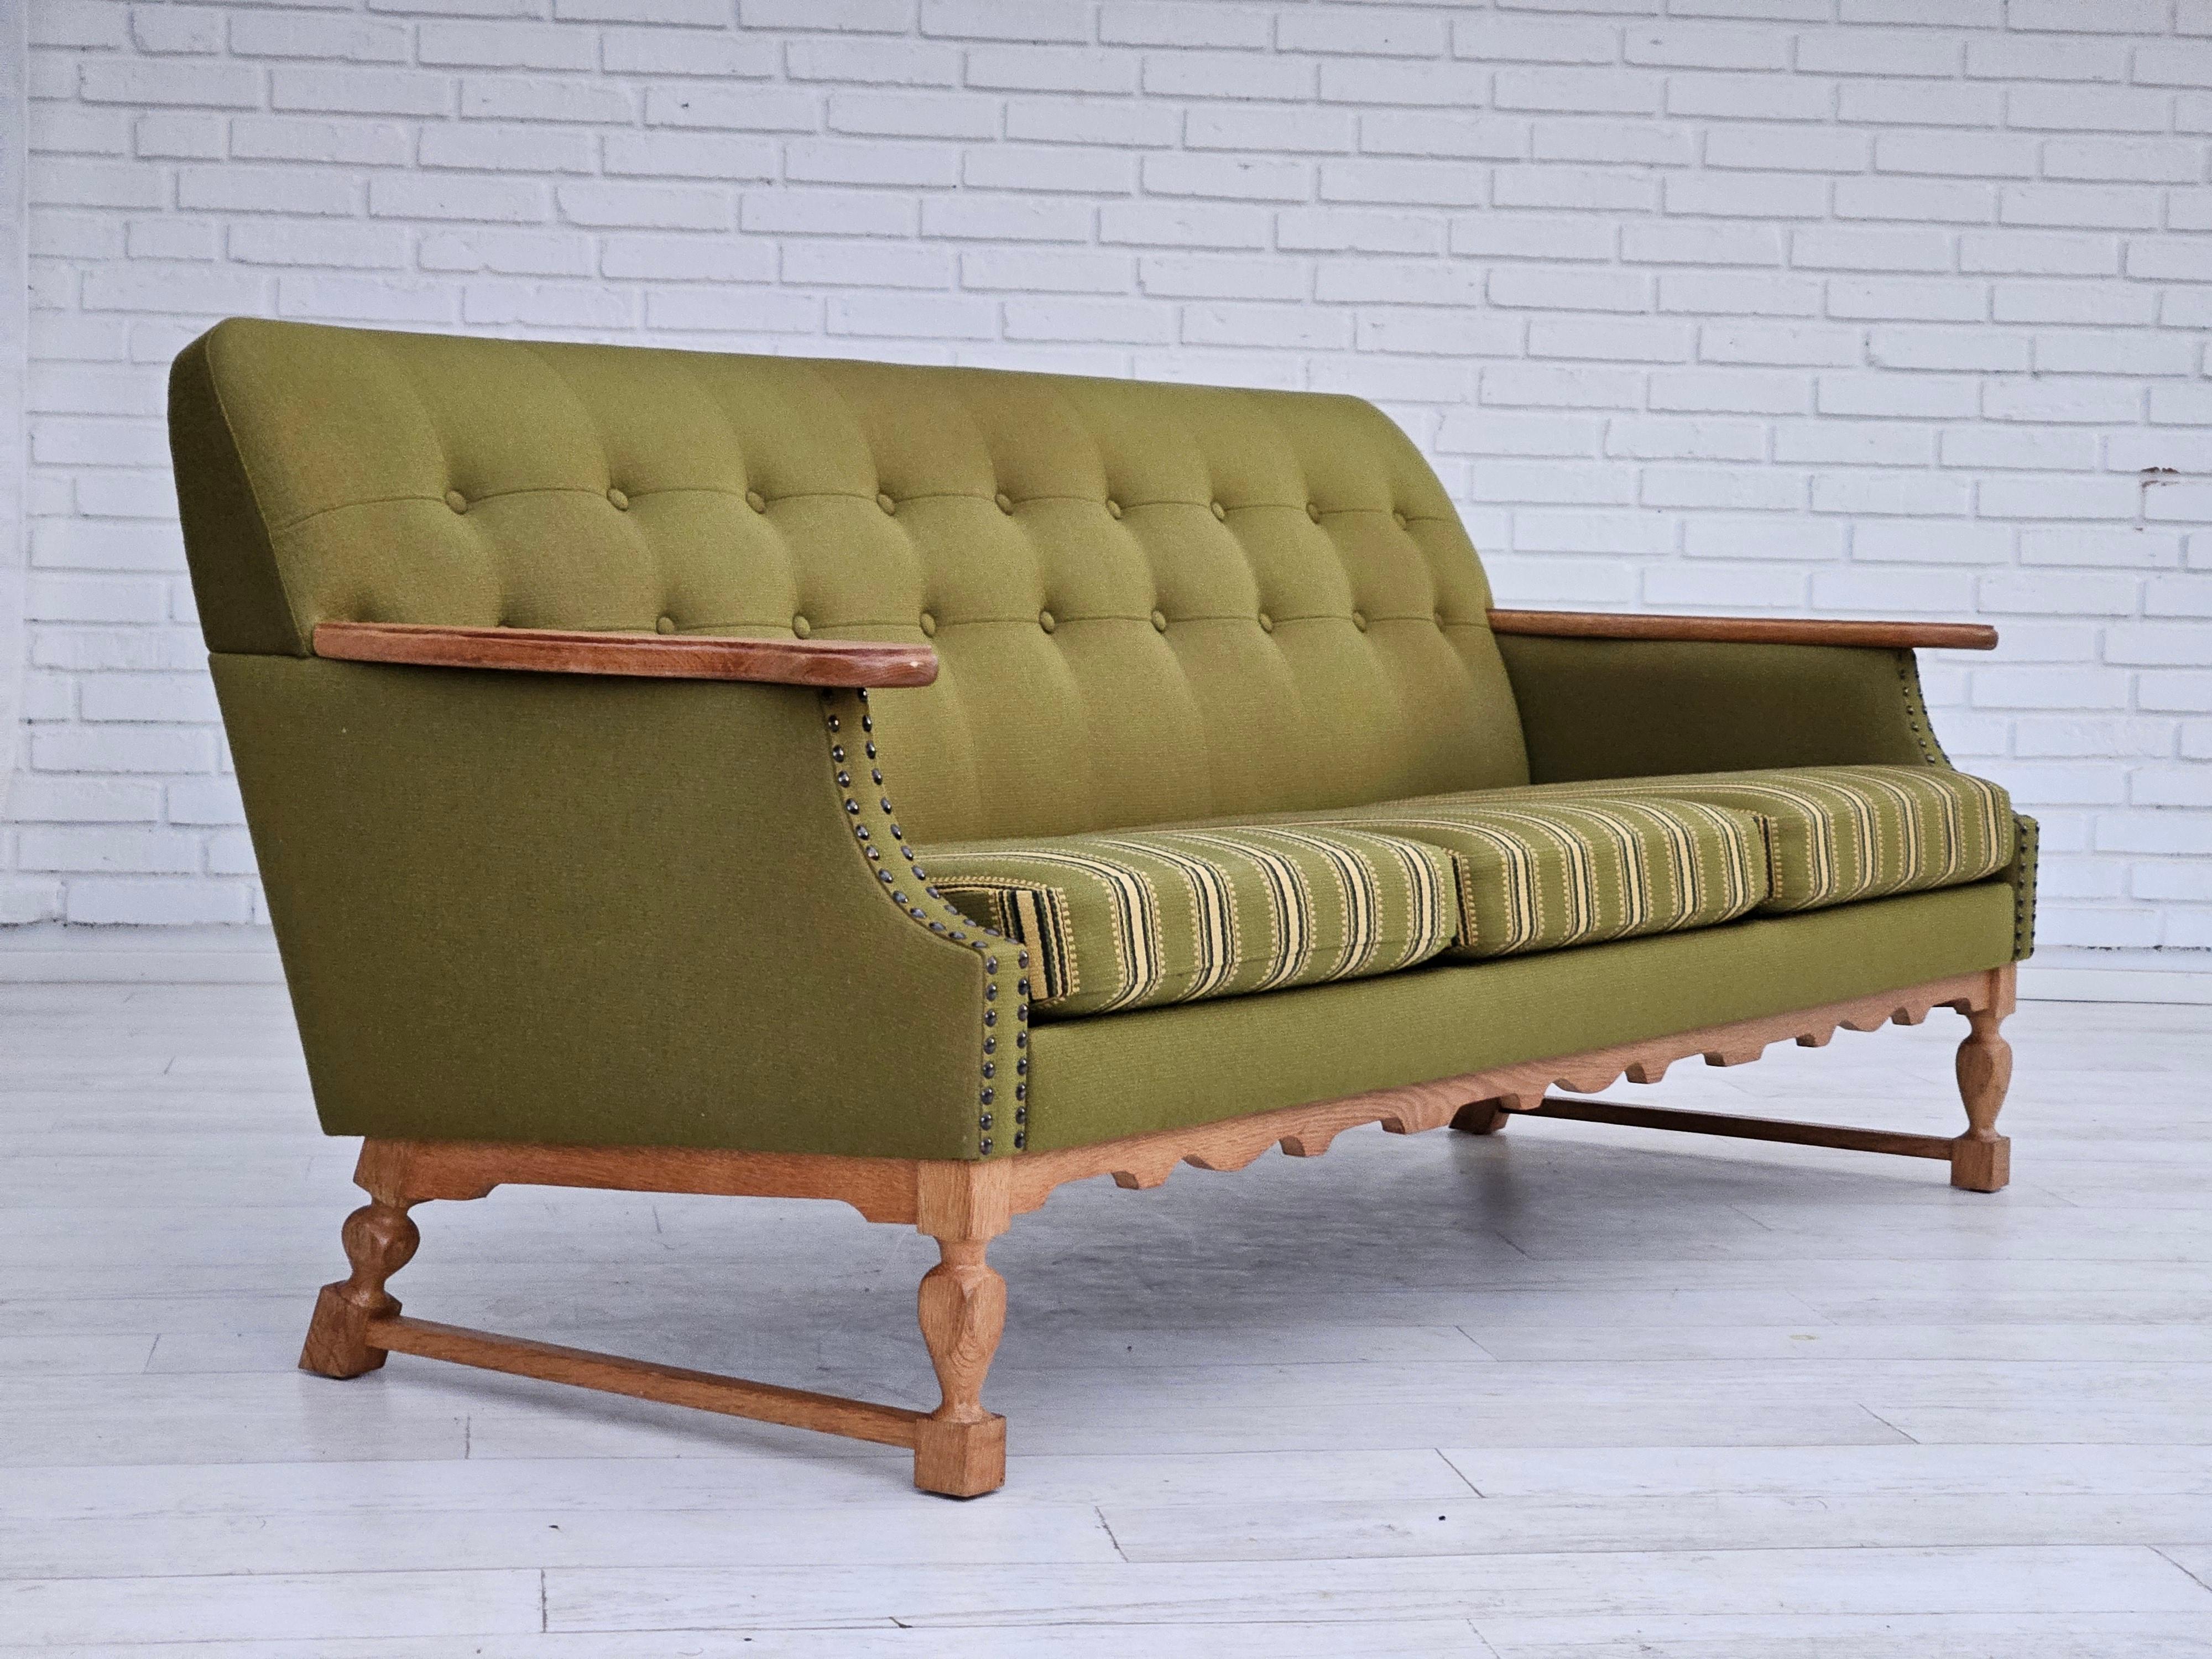 1970s, Danish 3 seater sofa. Original very good condition: no smells and no stains. Original olive green furniture wool fabric. Oak wood with springs inside. Manufactured by Danish furniture manufacturer in about 1970s.